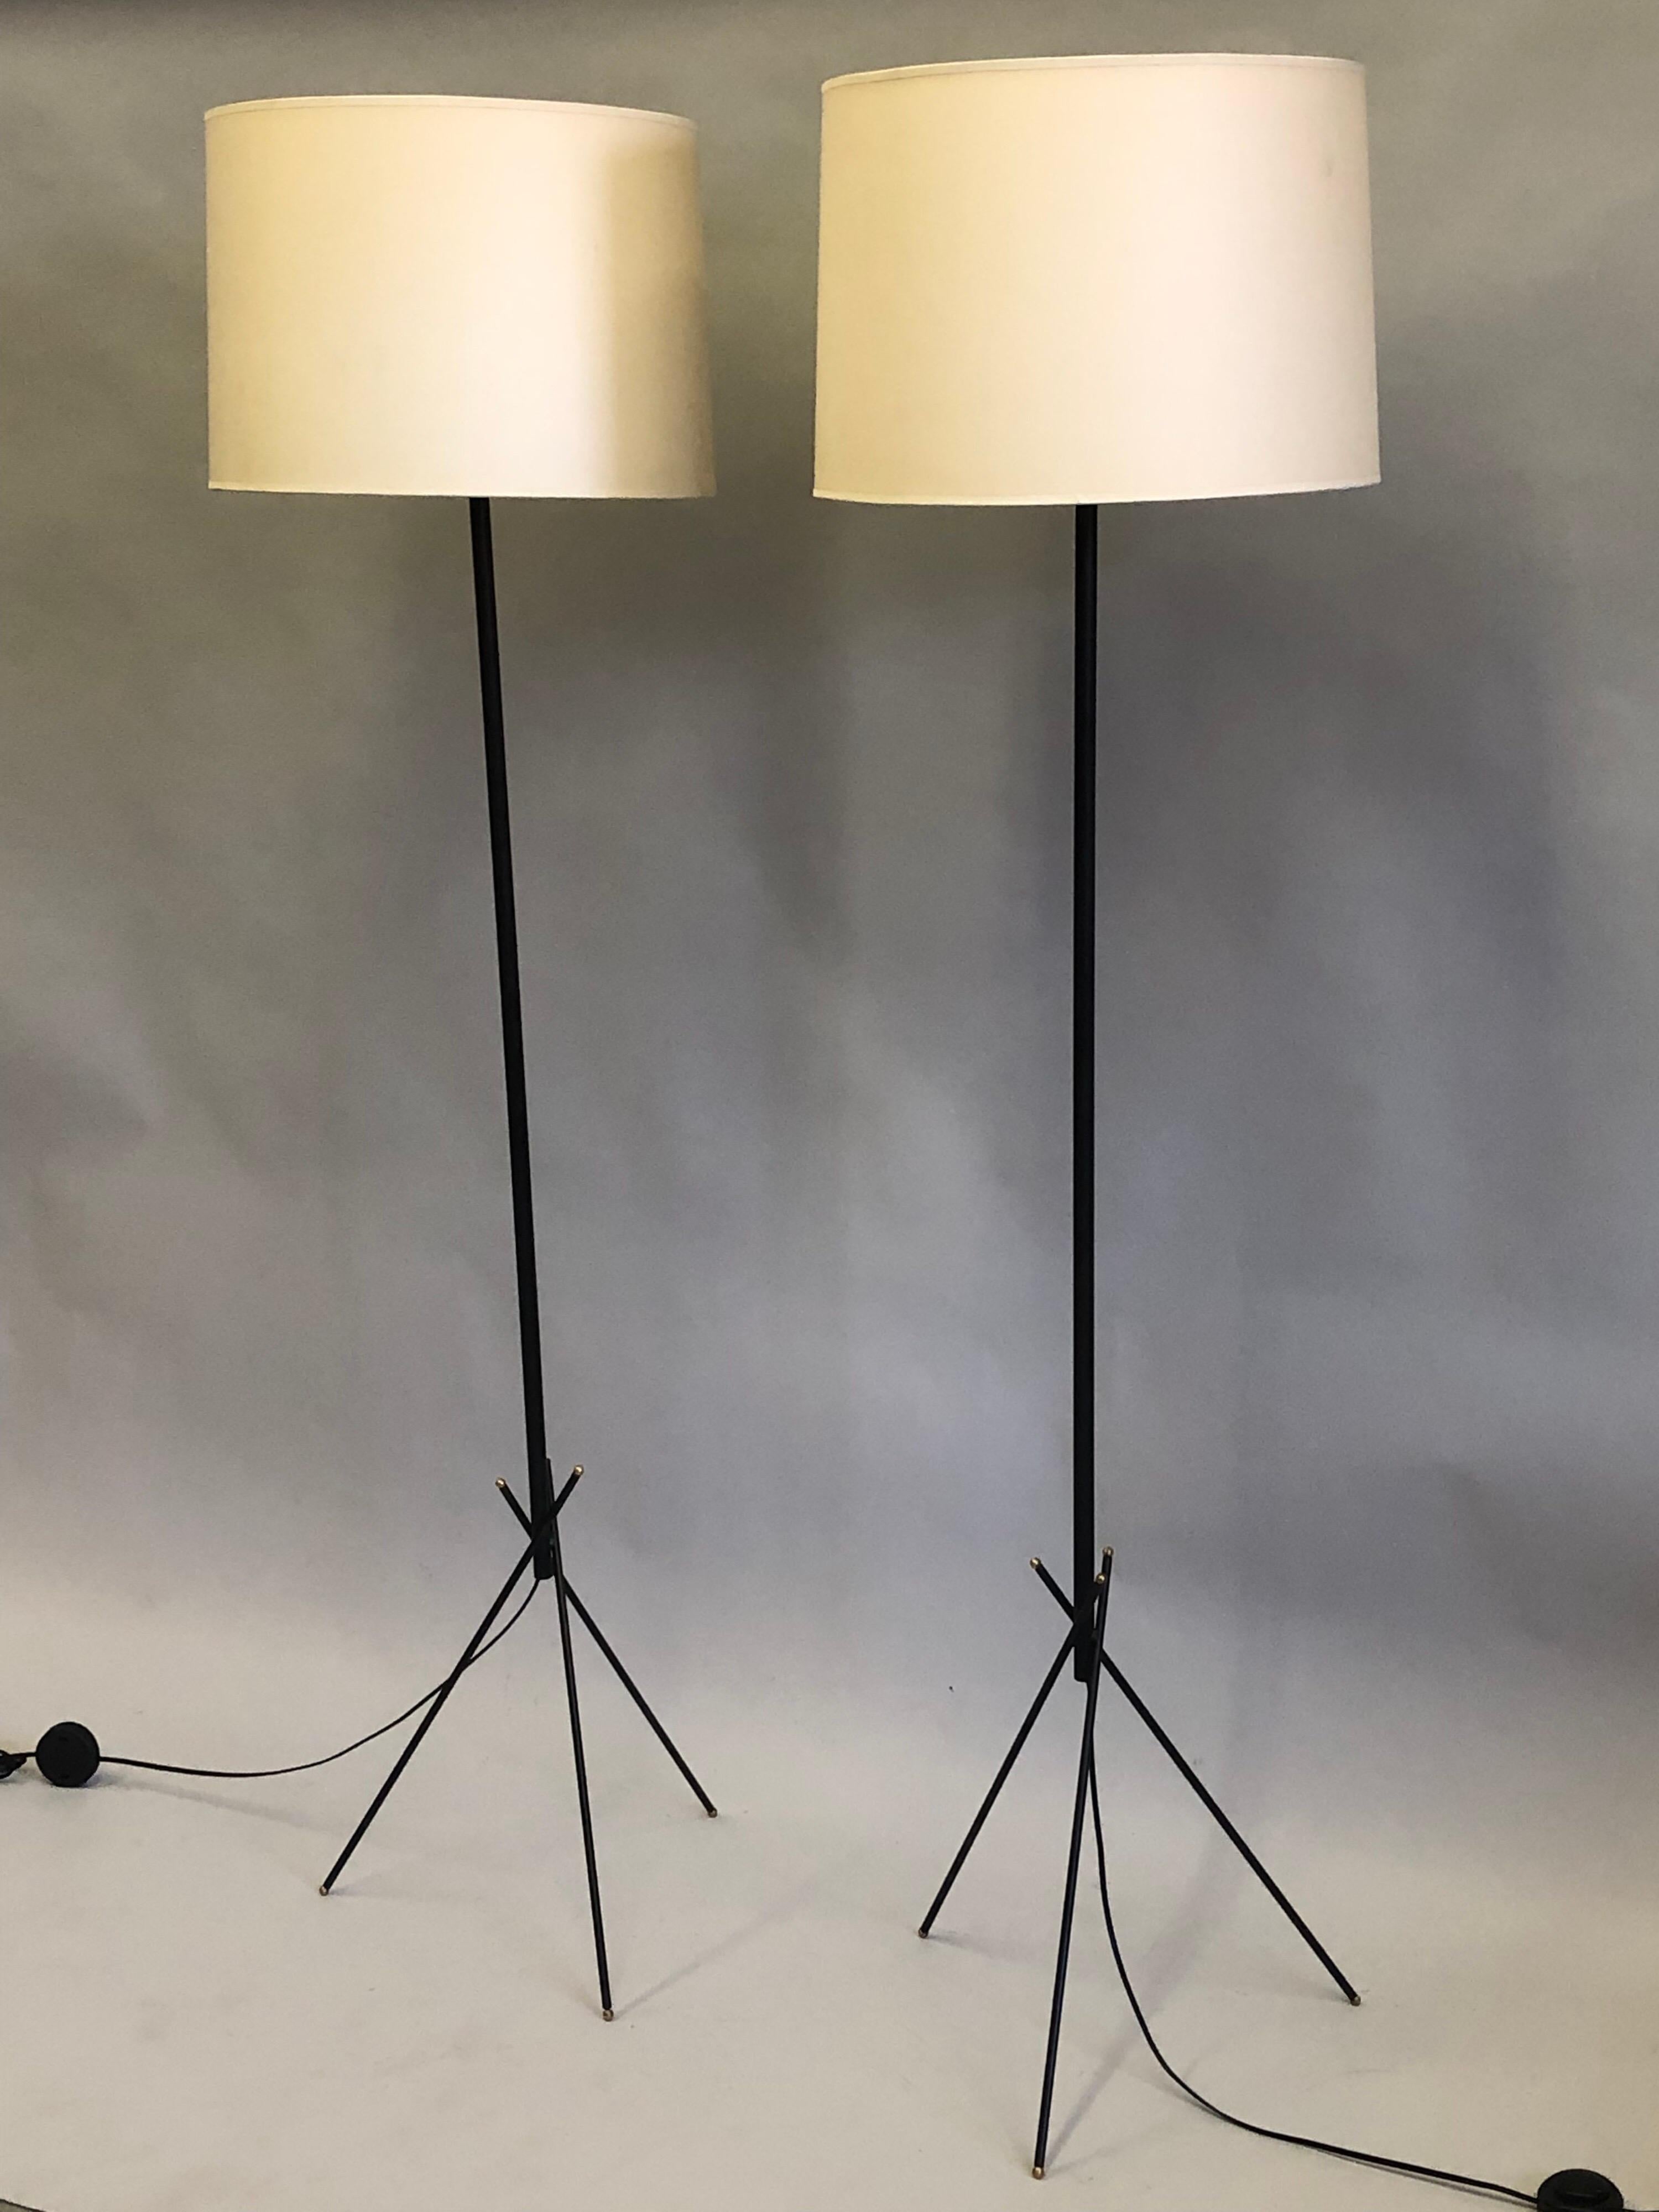 Patinated Pair of French Mid-Century Modern Wrought Iron Floor Lamps, Disderot For Sale